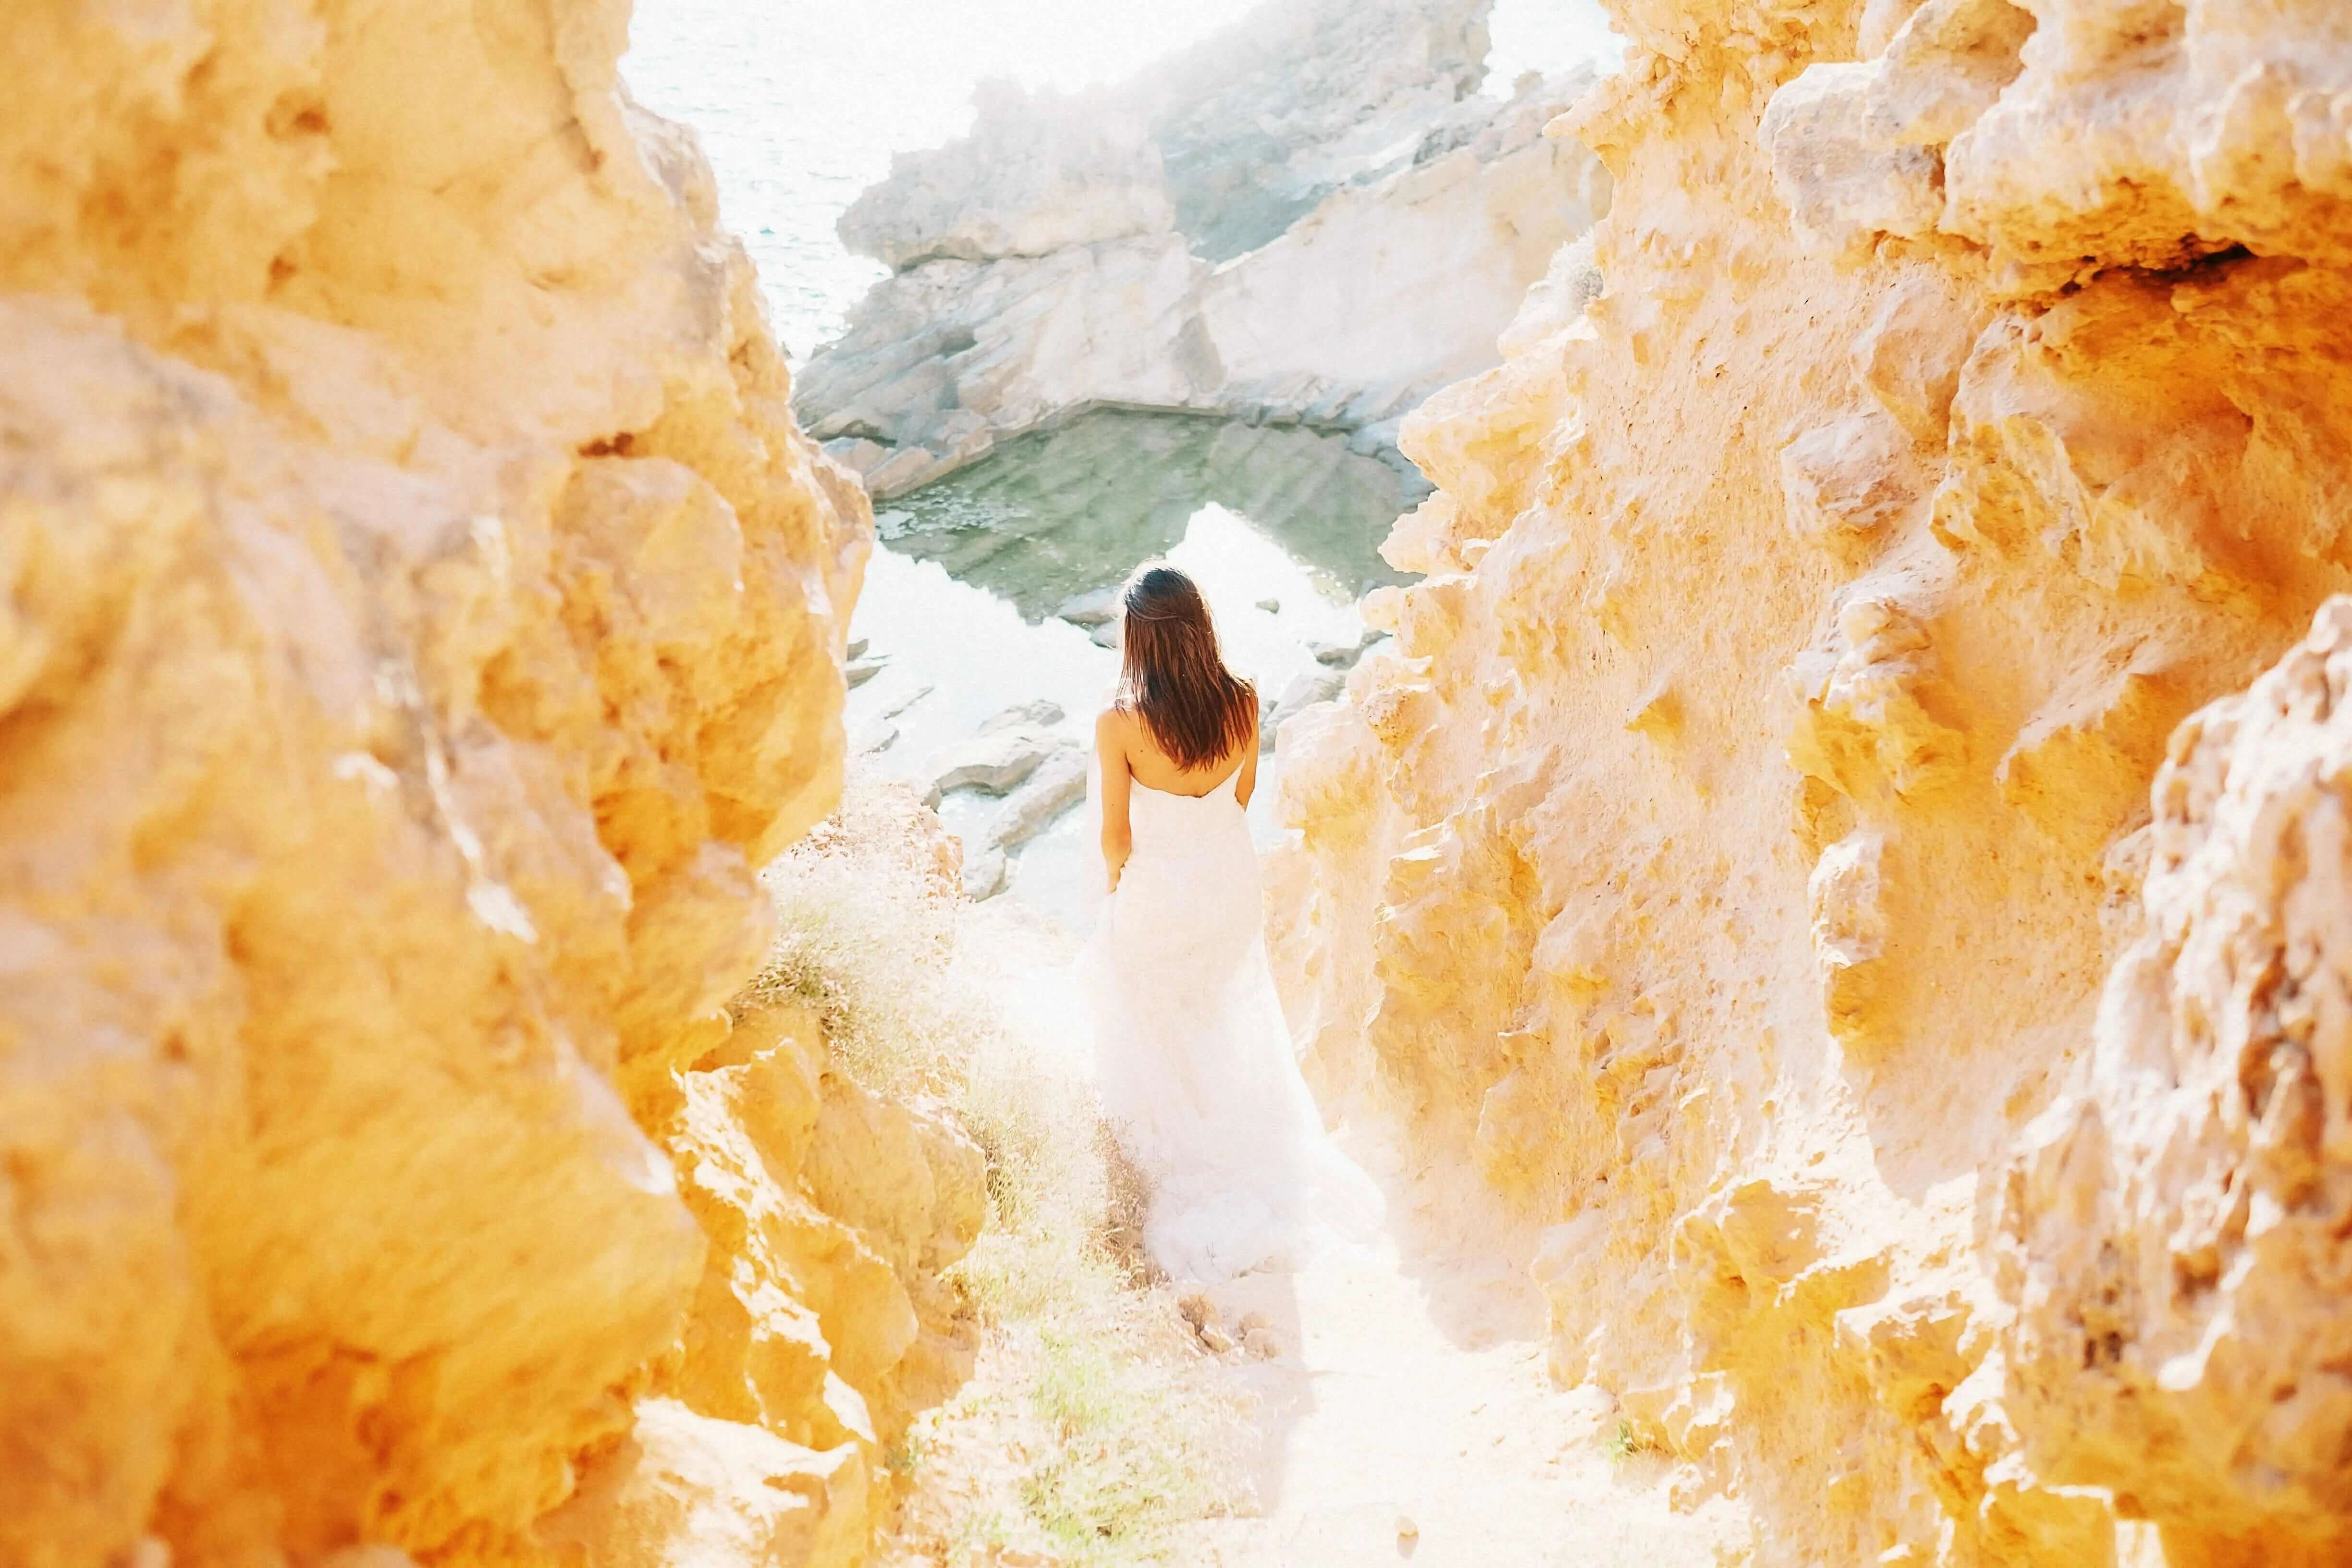 A woman in white walking between two cliffs at the beach on a sunny day